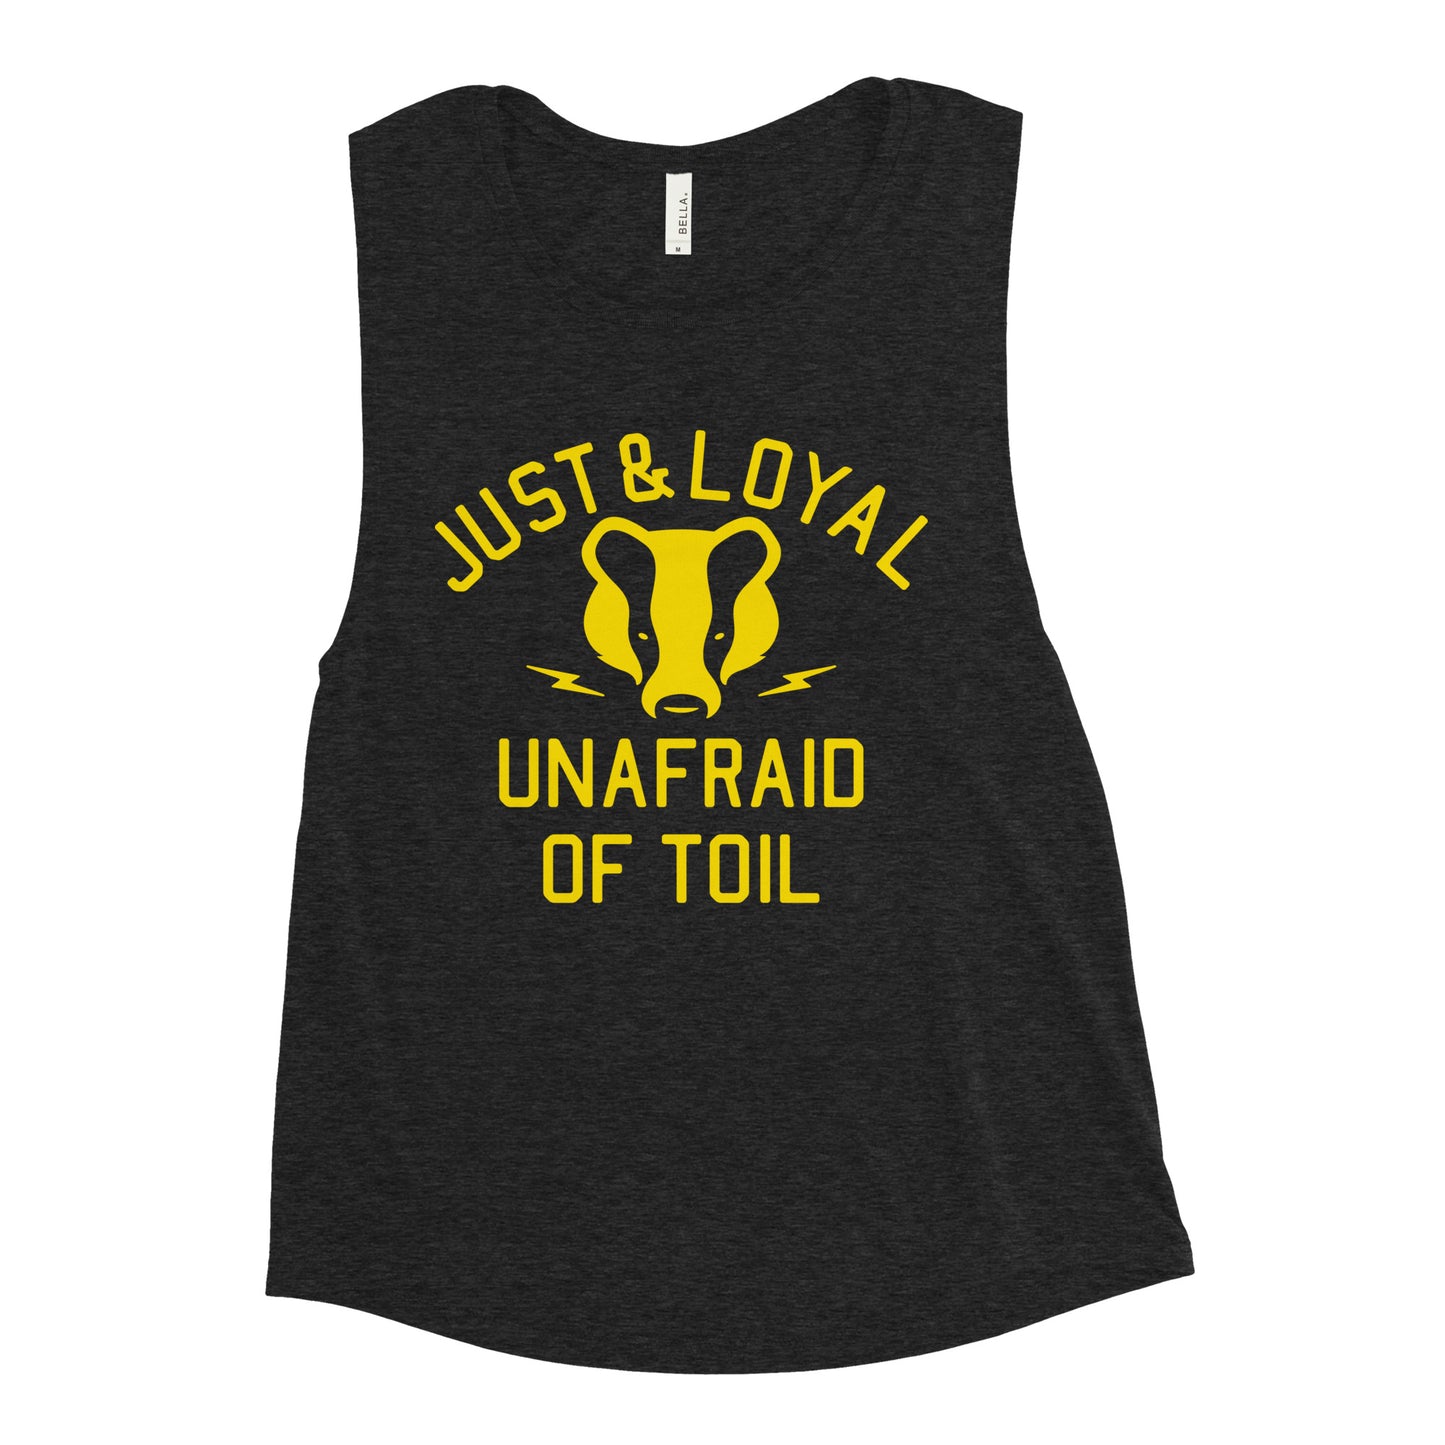 Just And Loyal, Unafraid Of Toil Women's Muscle Tank